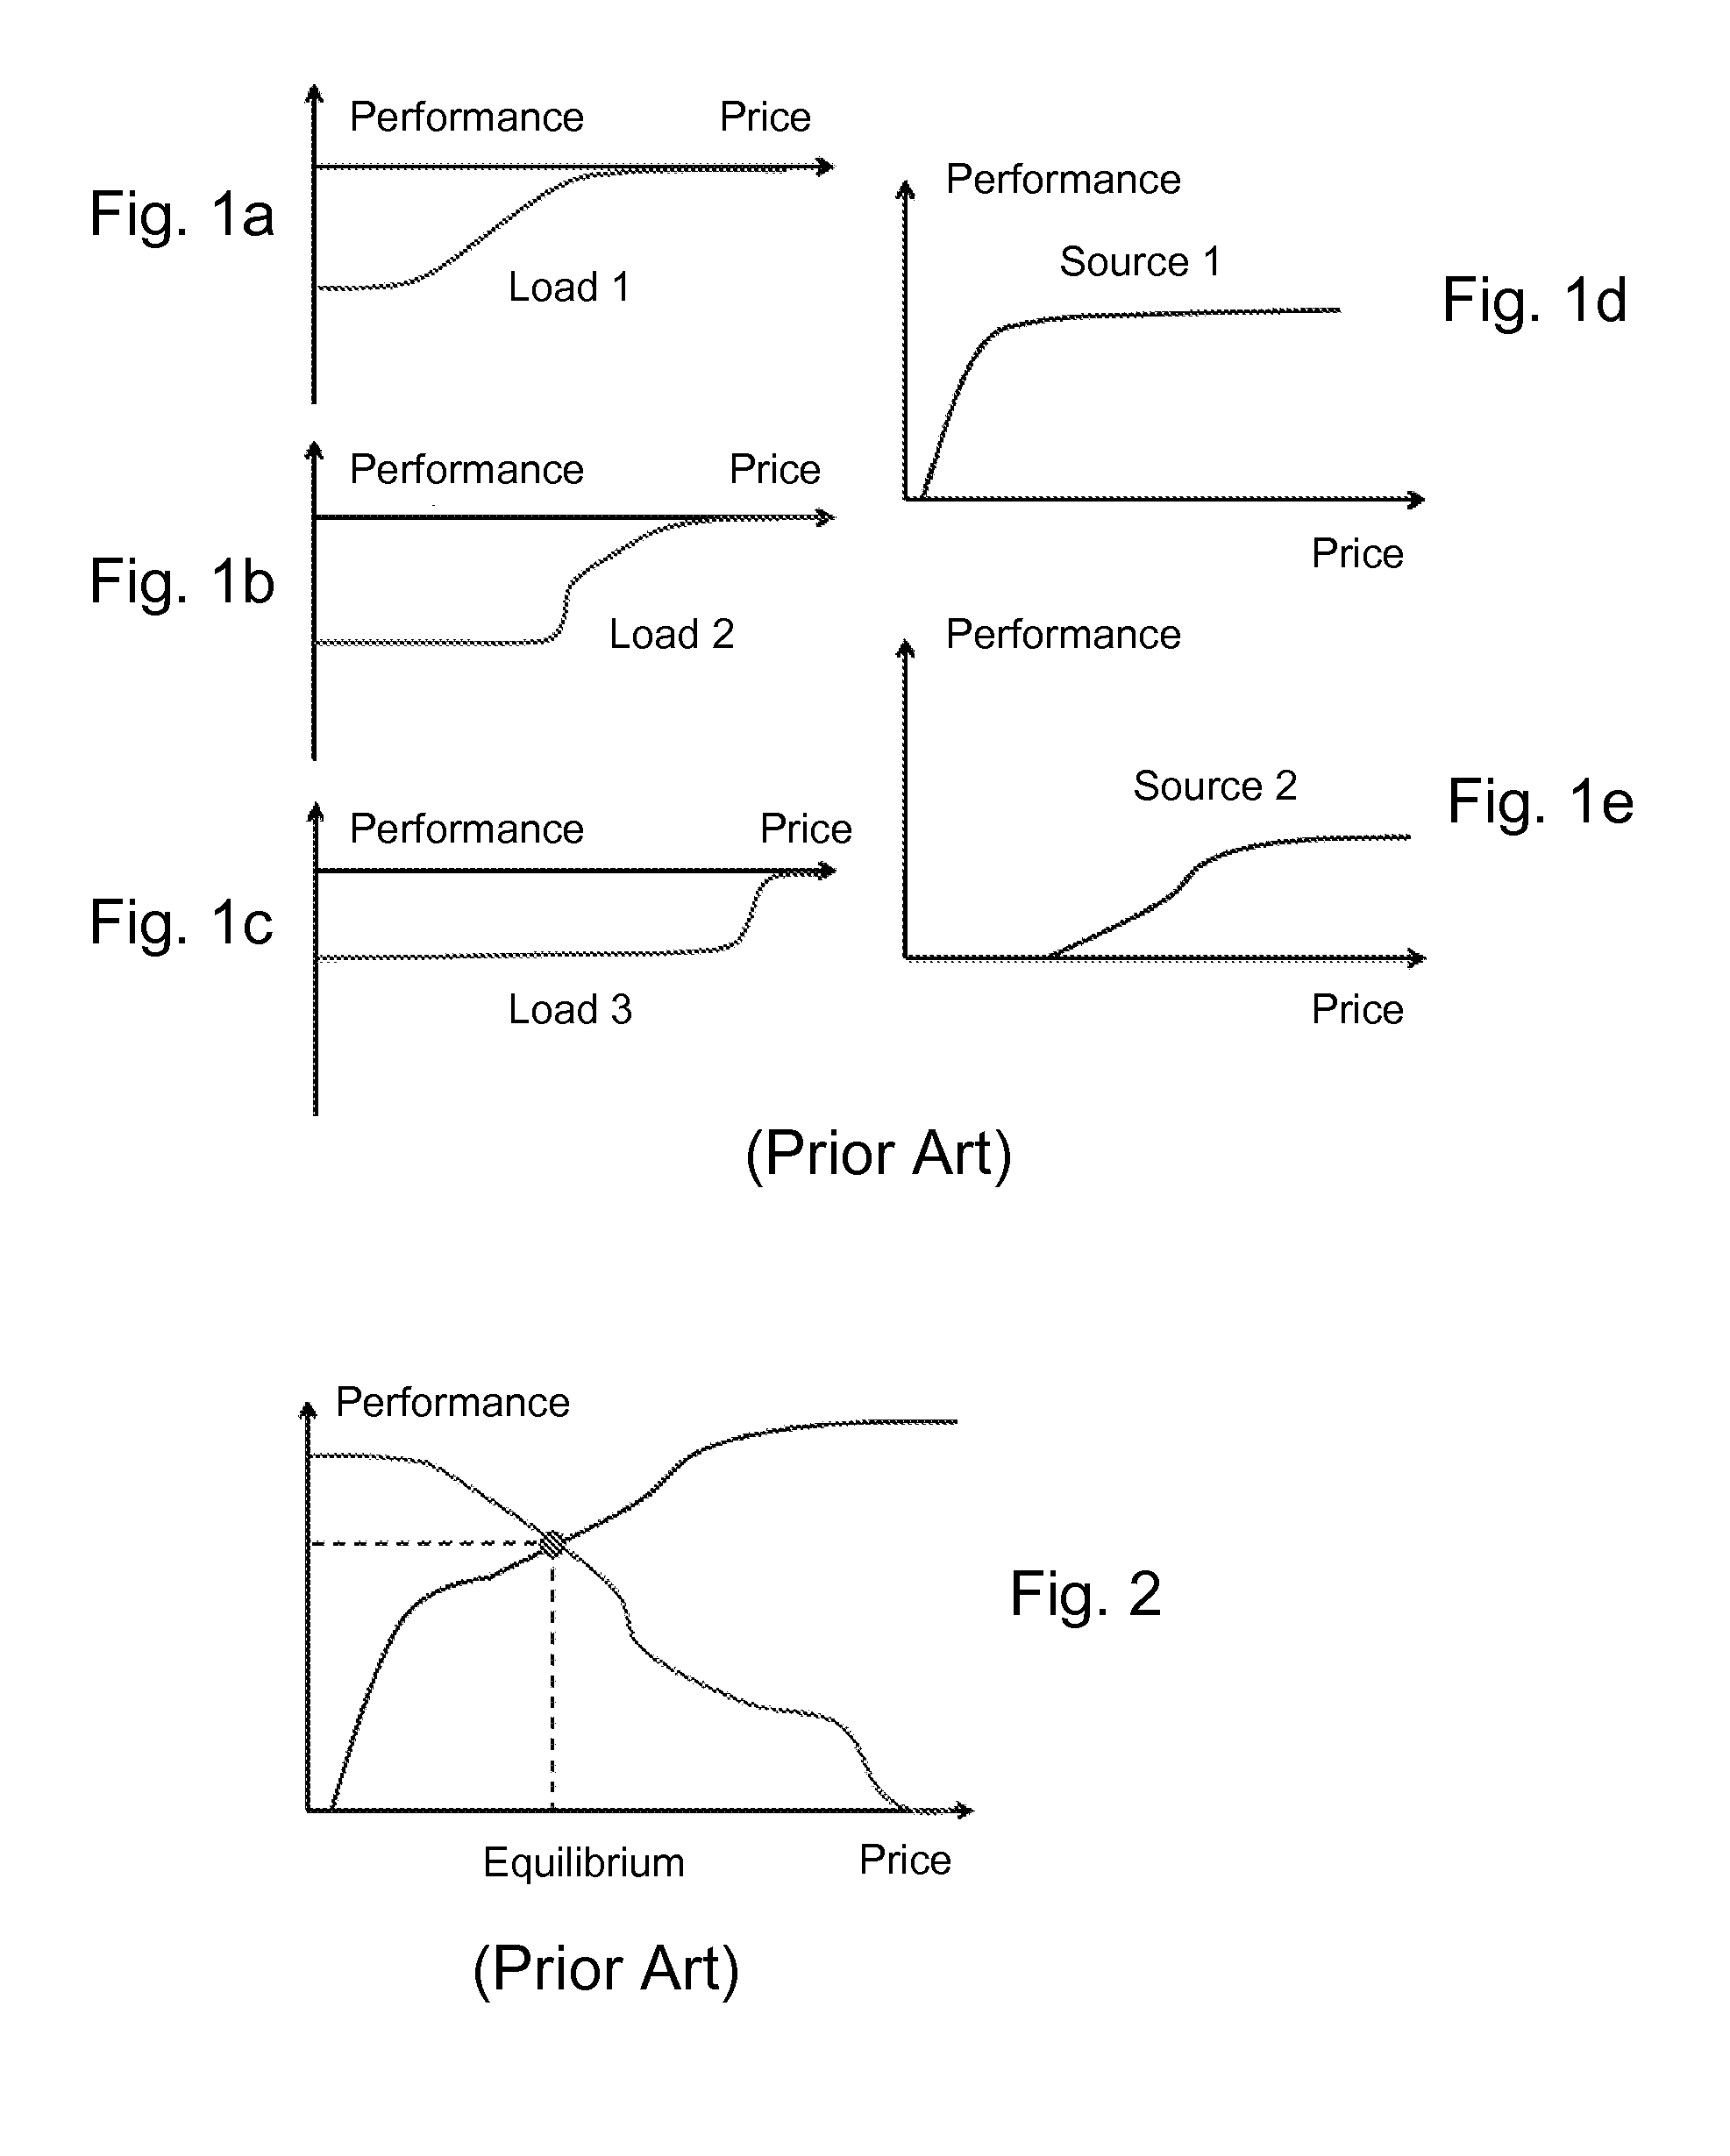 Energy management of a system according to an economic market model approach